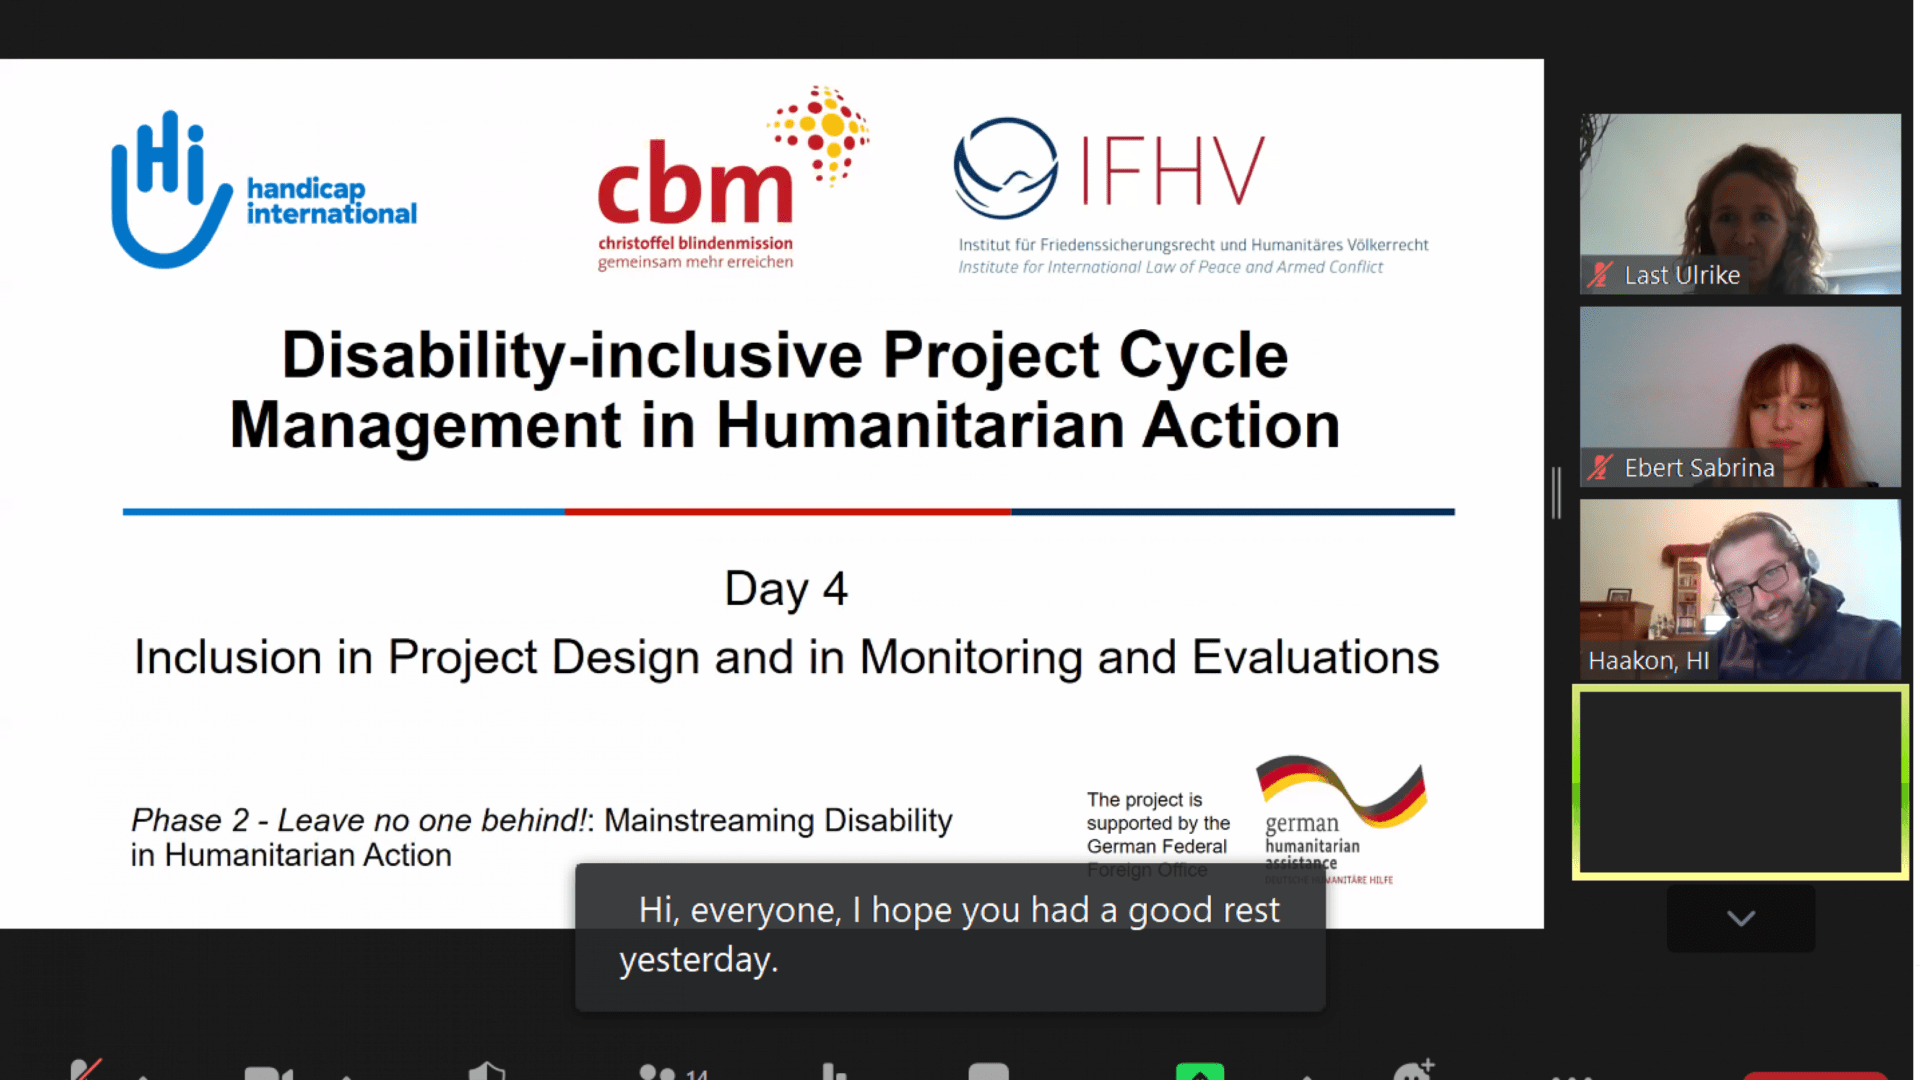 This picture shows a Powerpointslide with the title "Disability-inclusive Project Cycle Management in Humanitarian Action" and the hosts Ulrike Last, Sabrina Ebert and Haakon Spriewald.